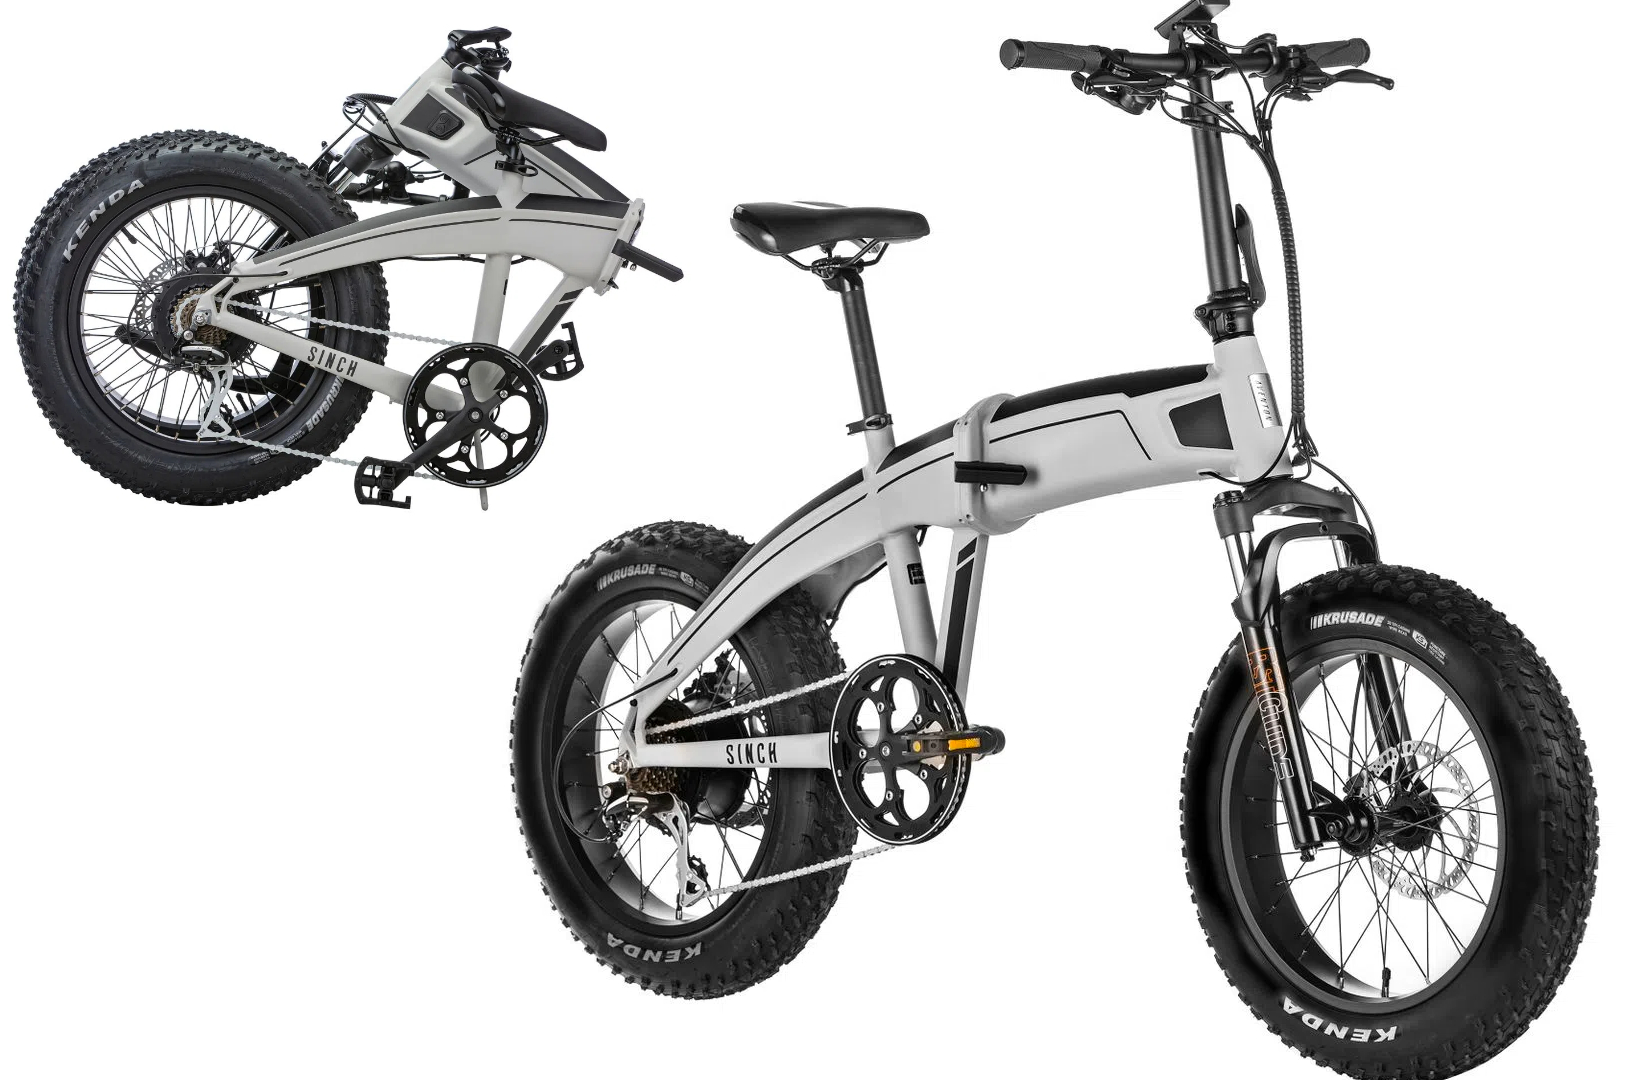 The Aventon Sinch Electric Bicycle